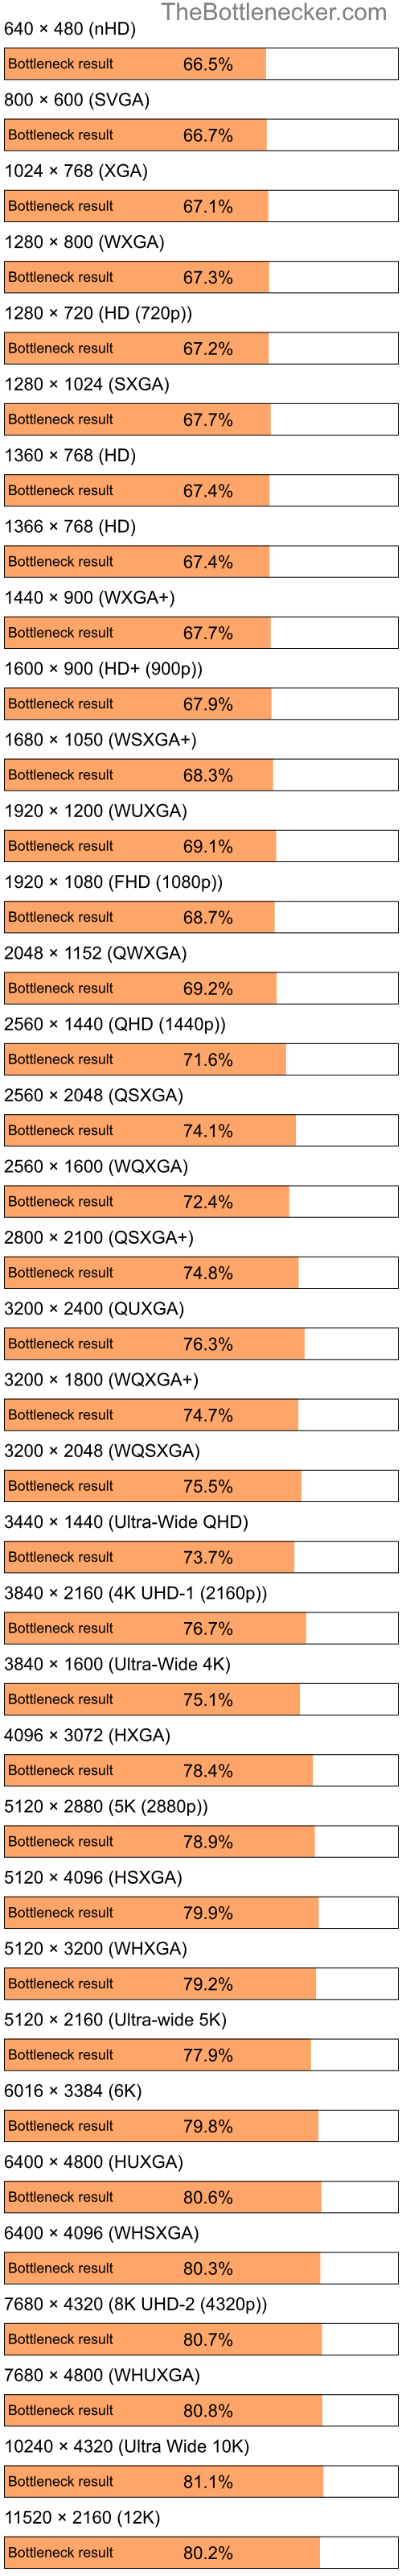 Bottleneck results by resolution for Intel Pentium 4 and NVIDIA GeForce 9400 in Graphic Card Intense Tasks